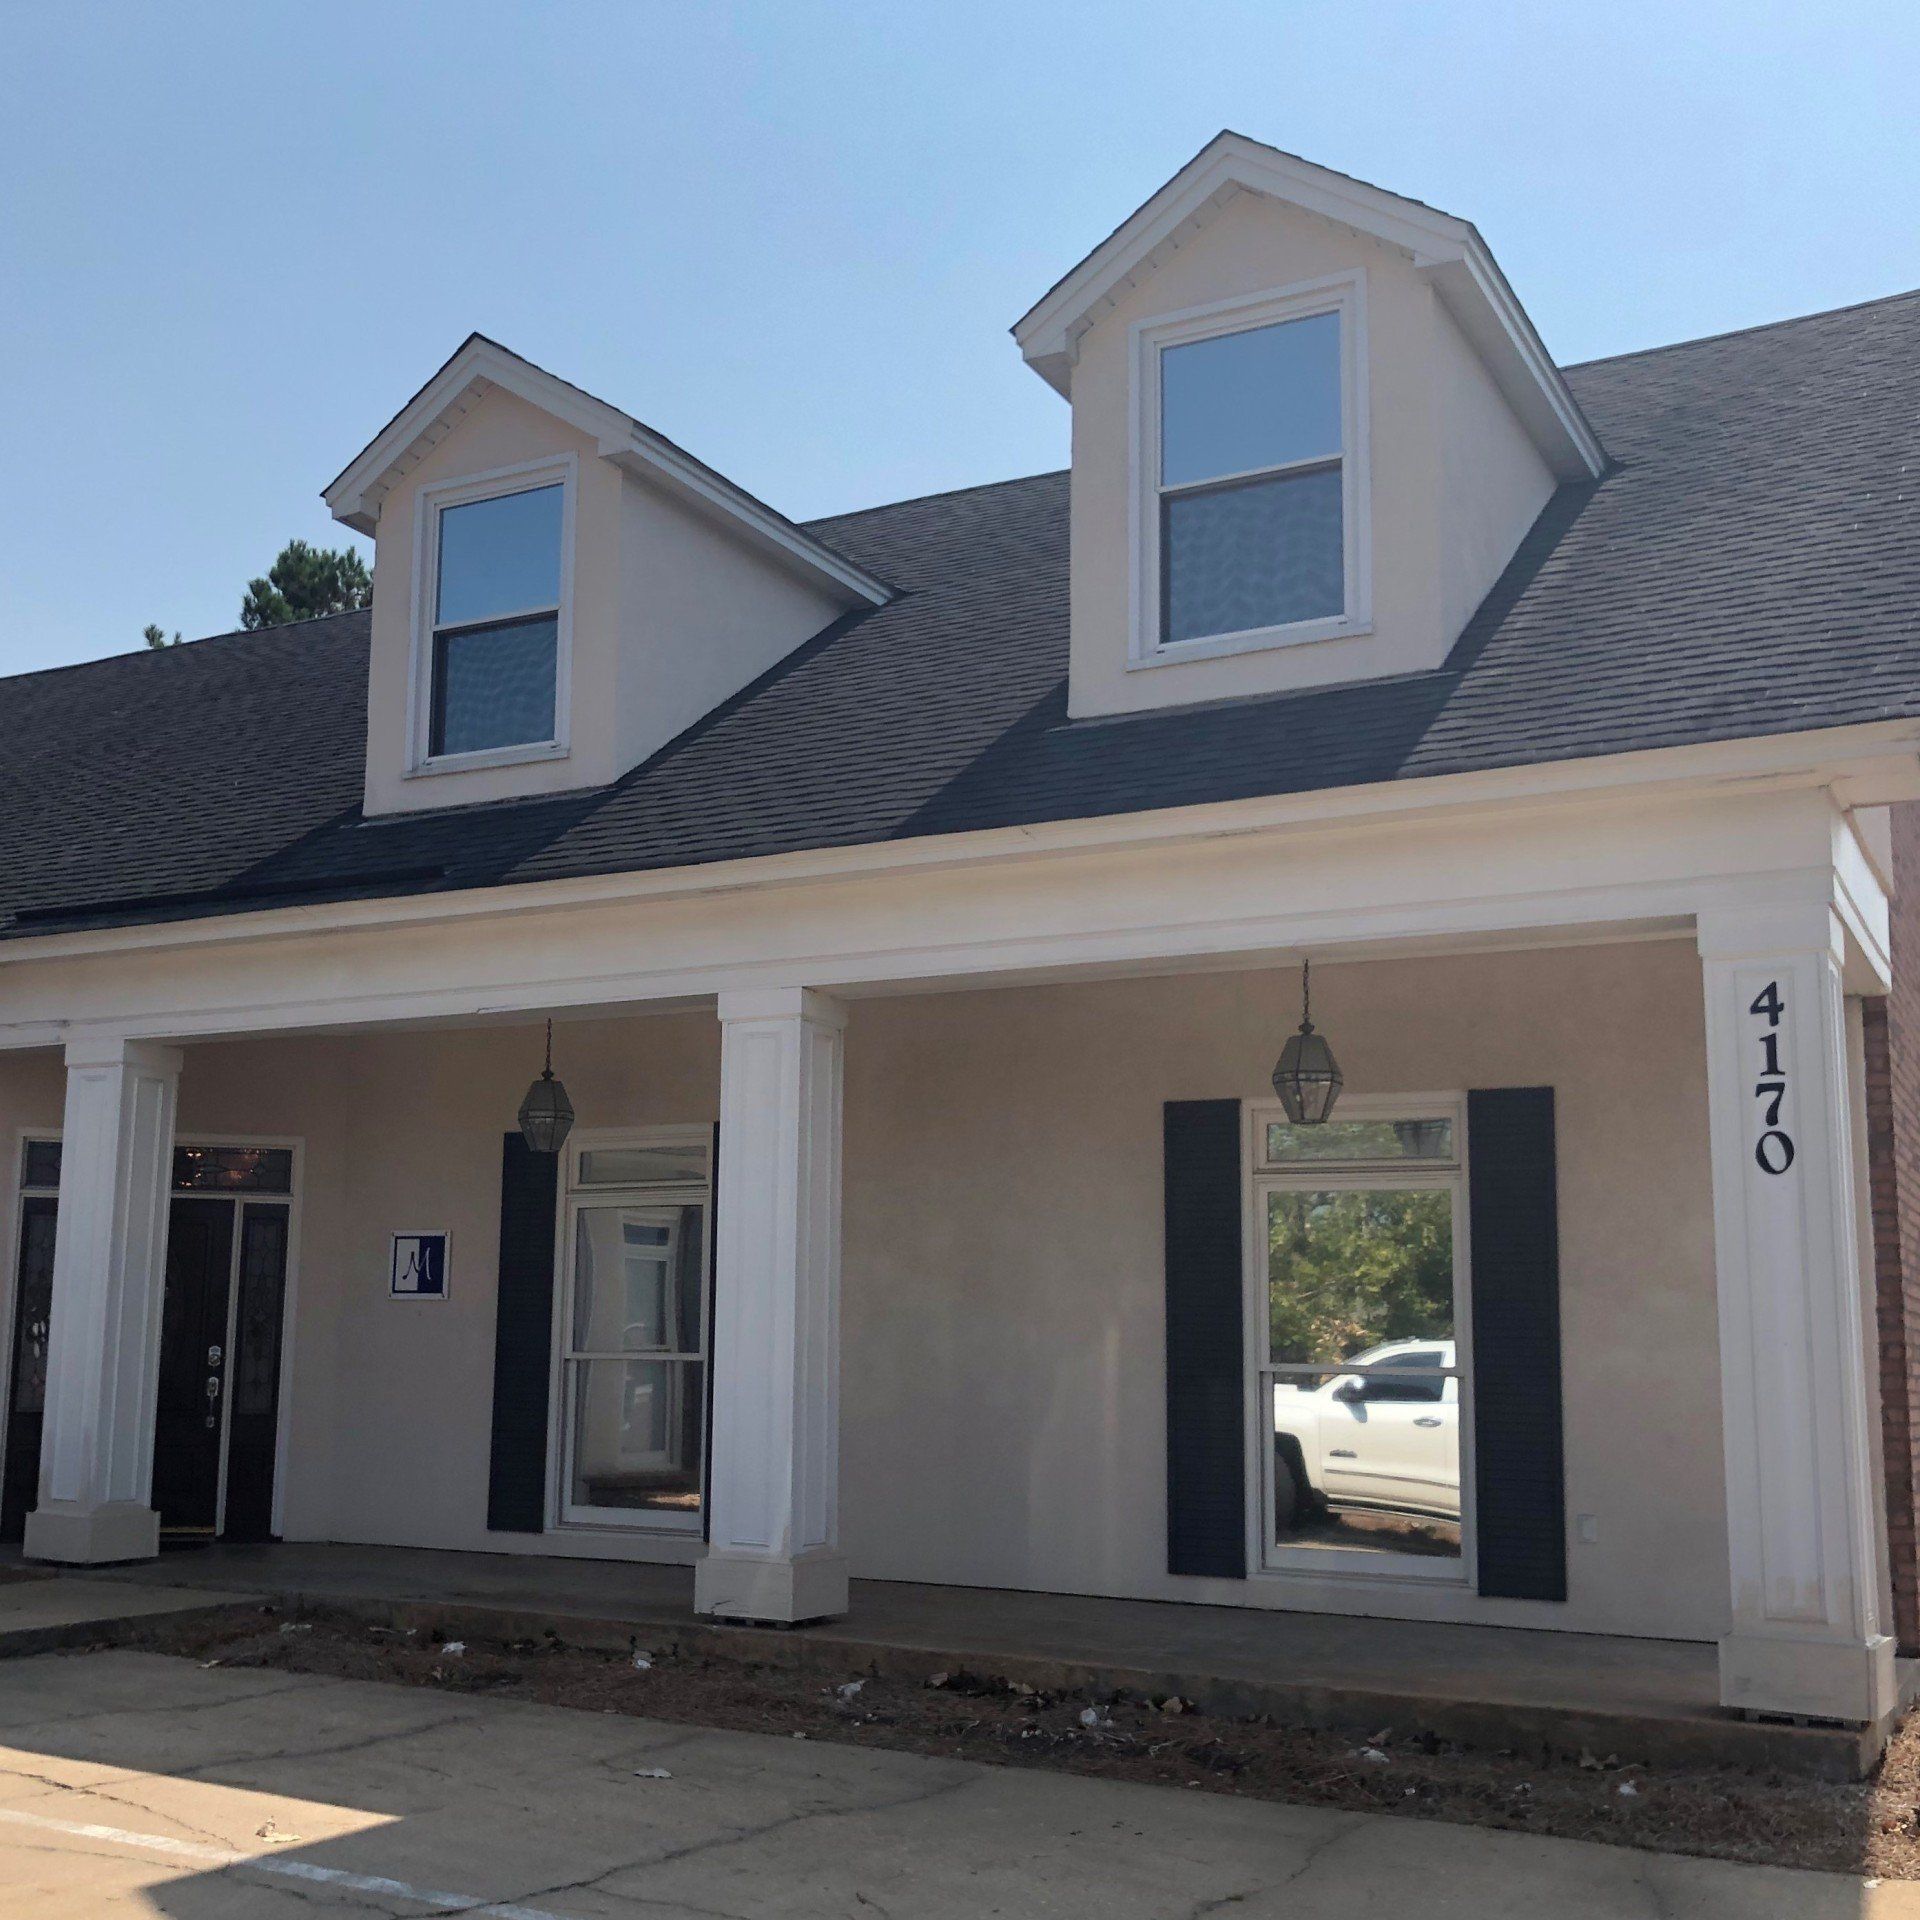 Residential windows tinted in Montgomery on 10.3.2019 - professional home tinting service in Montgomery, AL